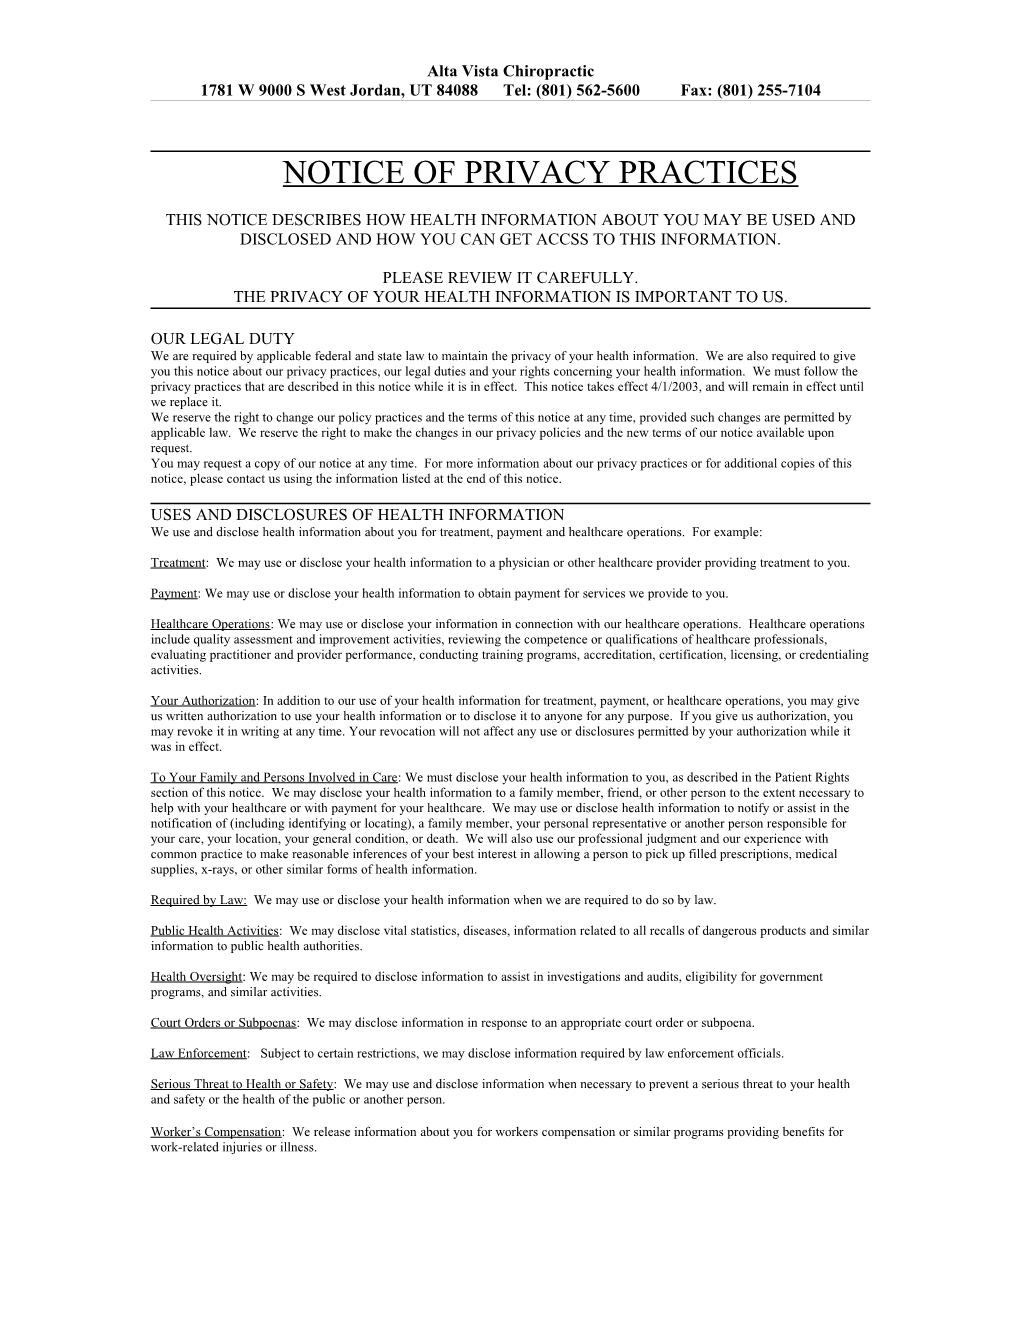 Notice of Privacy Practices s16